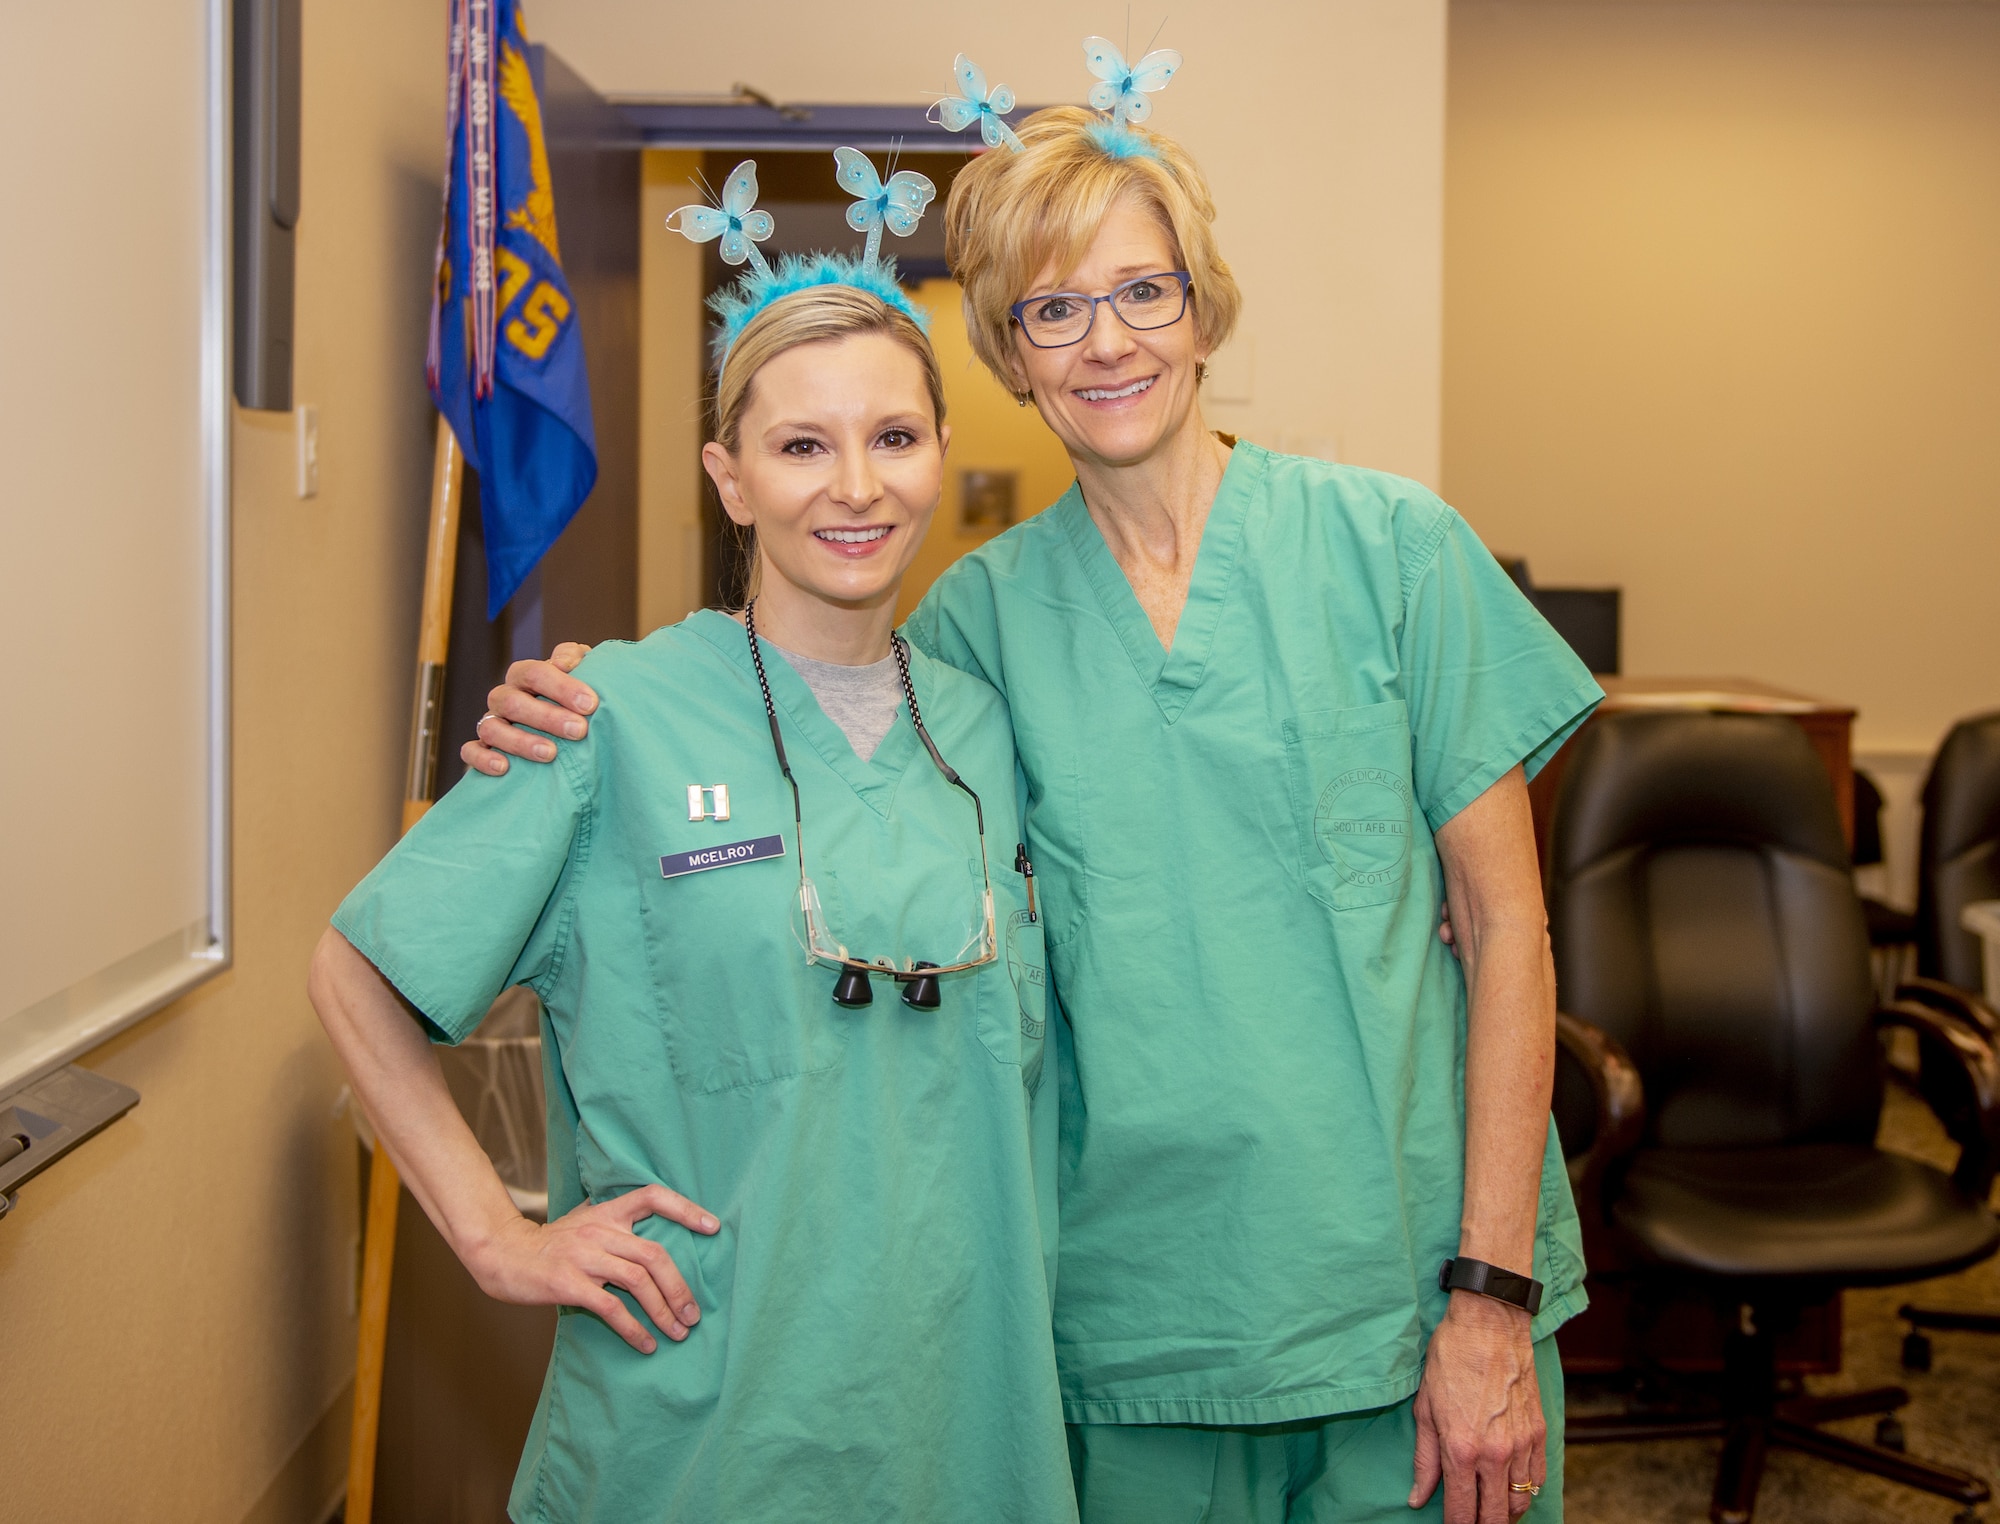 Capt. Kristi McElroy, 375th Dental Squadron general dentist, and Virginia Bennett, Chief of Preventive Dentistry, set aside a moment for a photo following the kickoff of the “Give Kids a Smile” day event March 9, 2019, held by Scott Air Force Base, Illinois.  Bennett and McElroy were both vital to the planning of the event as well as personally providing treatment to the children who attended.   (U.S. Air Force photo by Airman 1st Class Isaiah Gonzalez)